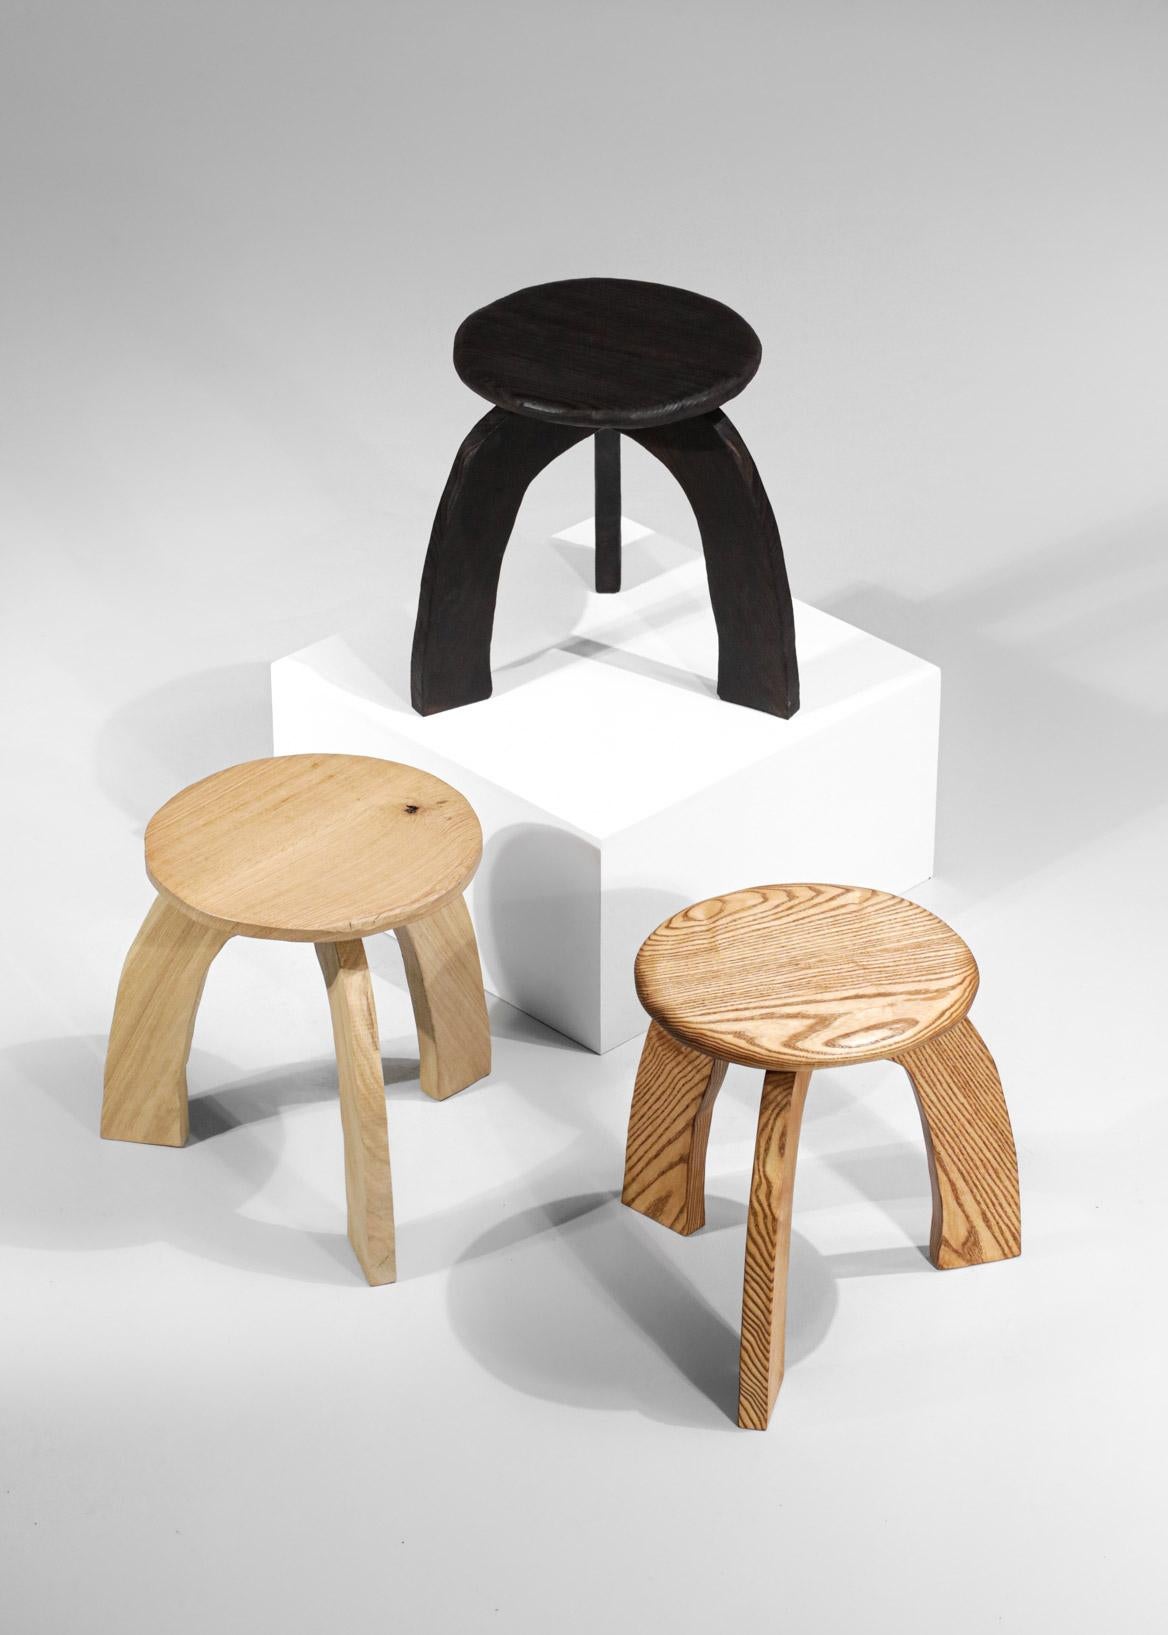 Danke galerie presents the latest creation of the cabinetmaker Vincent Vincent. This Ethnic inspired stool in solid oak will bring a unique touch to your interior decoration. Designed with quality, comfort and sturdiness in mind, each piece by